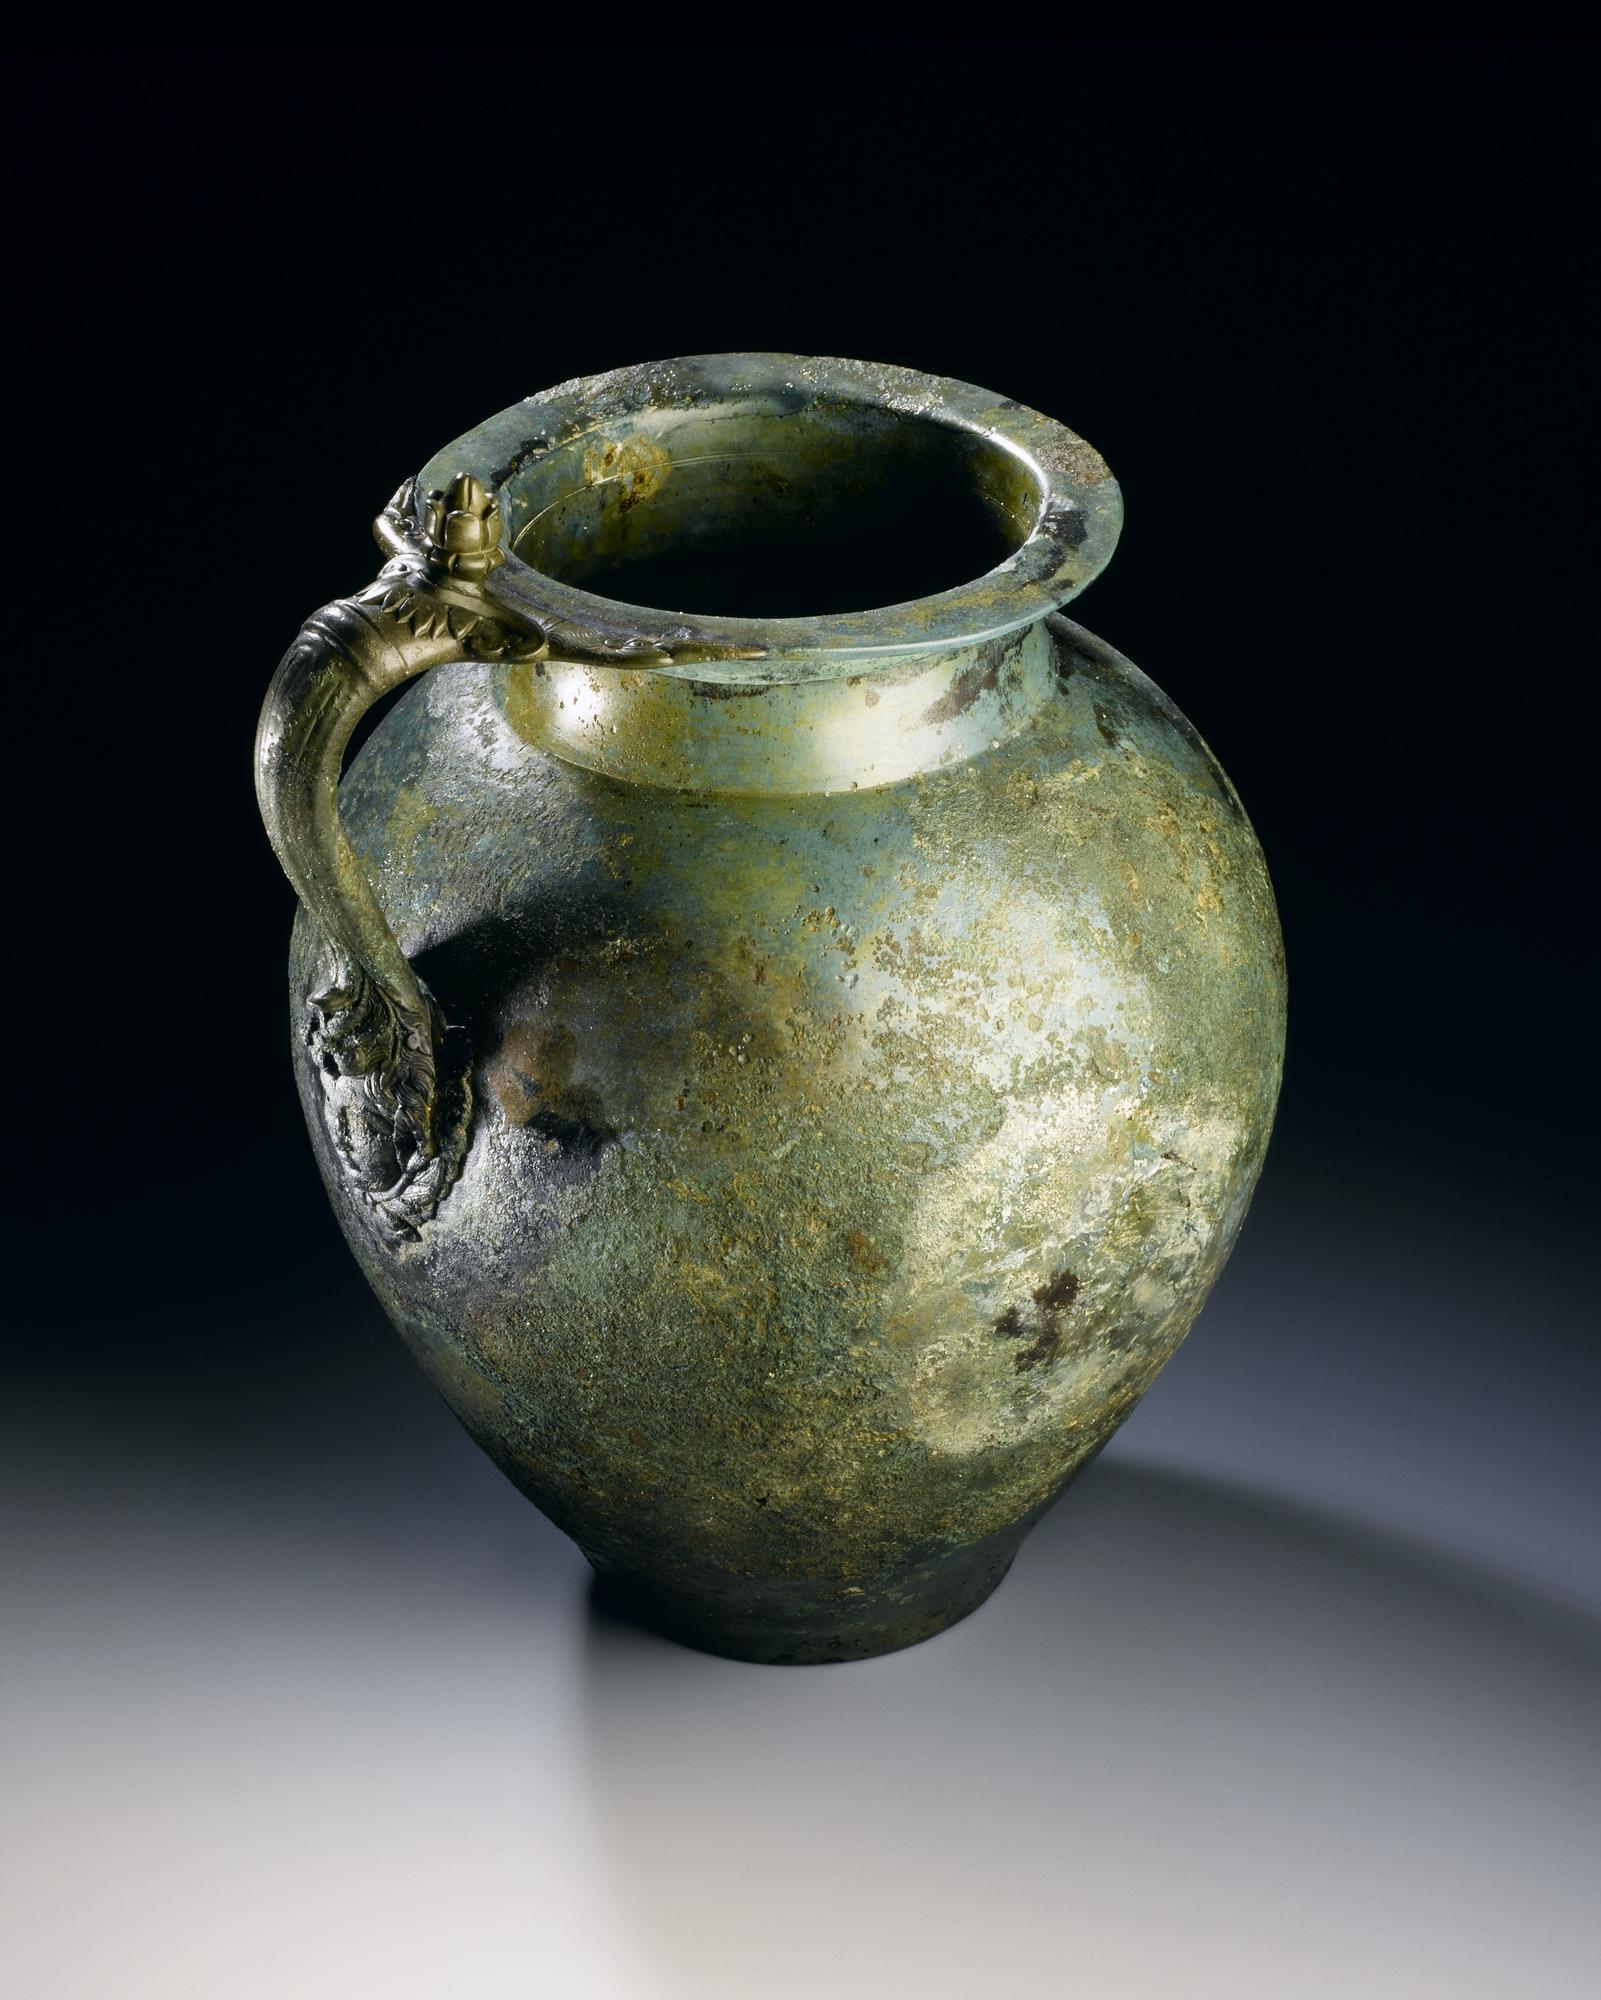 Image of Large bronze wine jug, the handle is decorated at the rim with a lotus bud between two birds heads